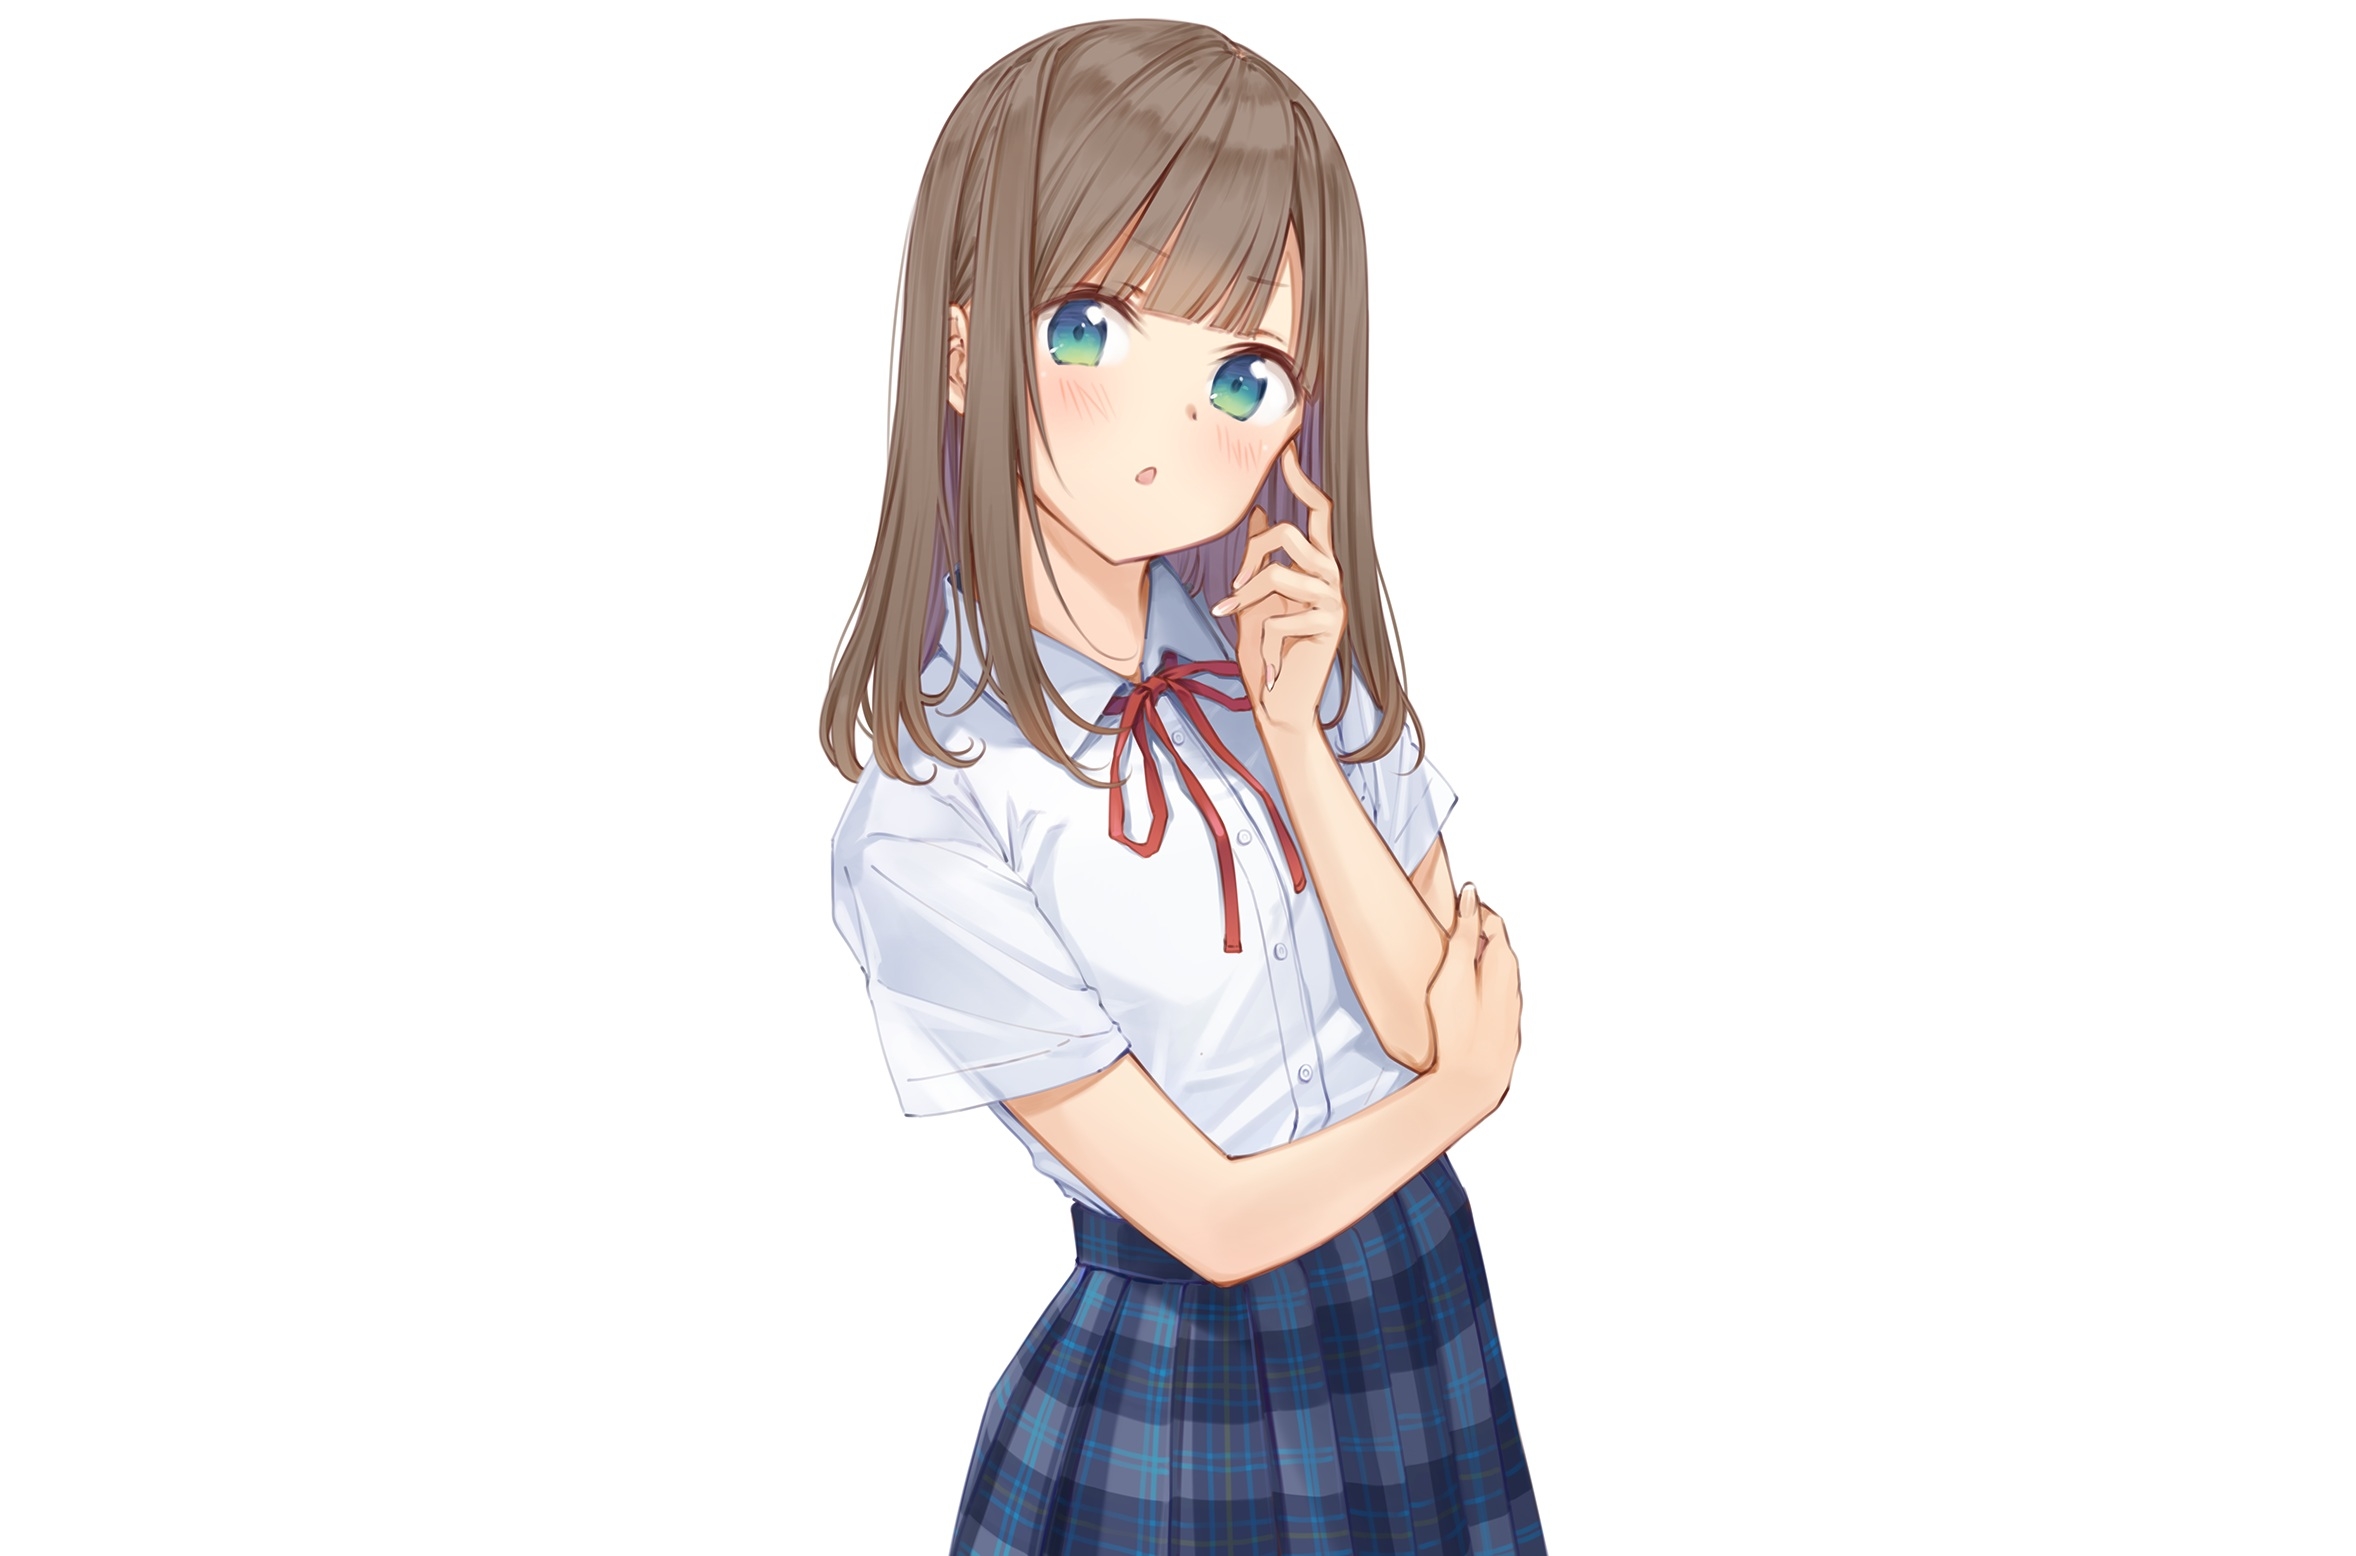 pretty anime girl with brown hair and blue eyes